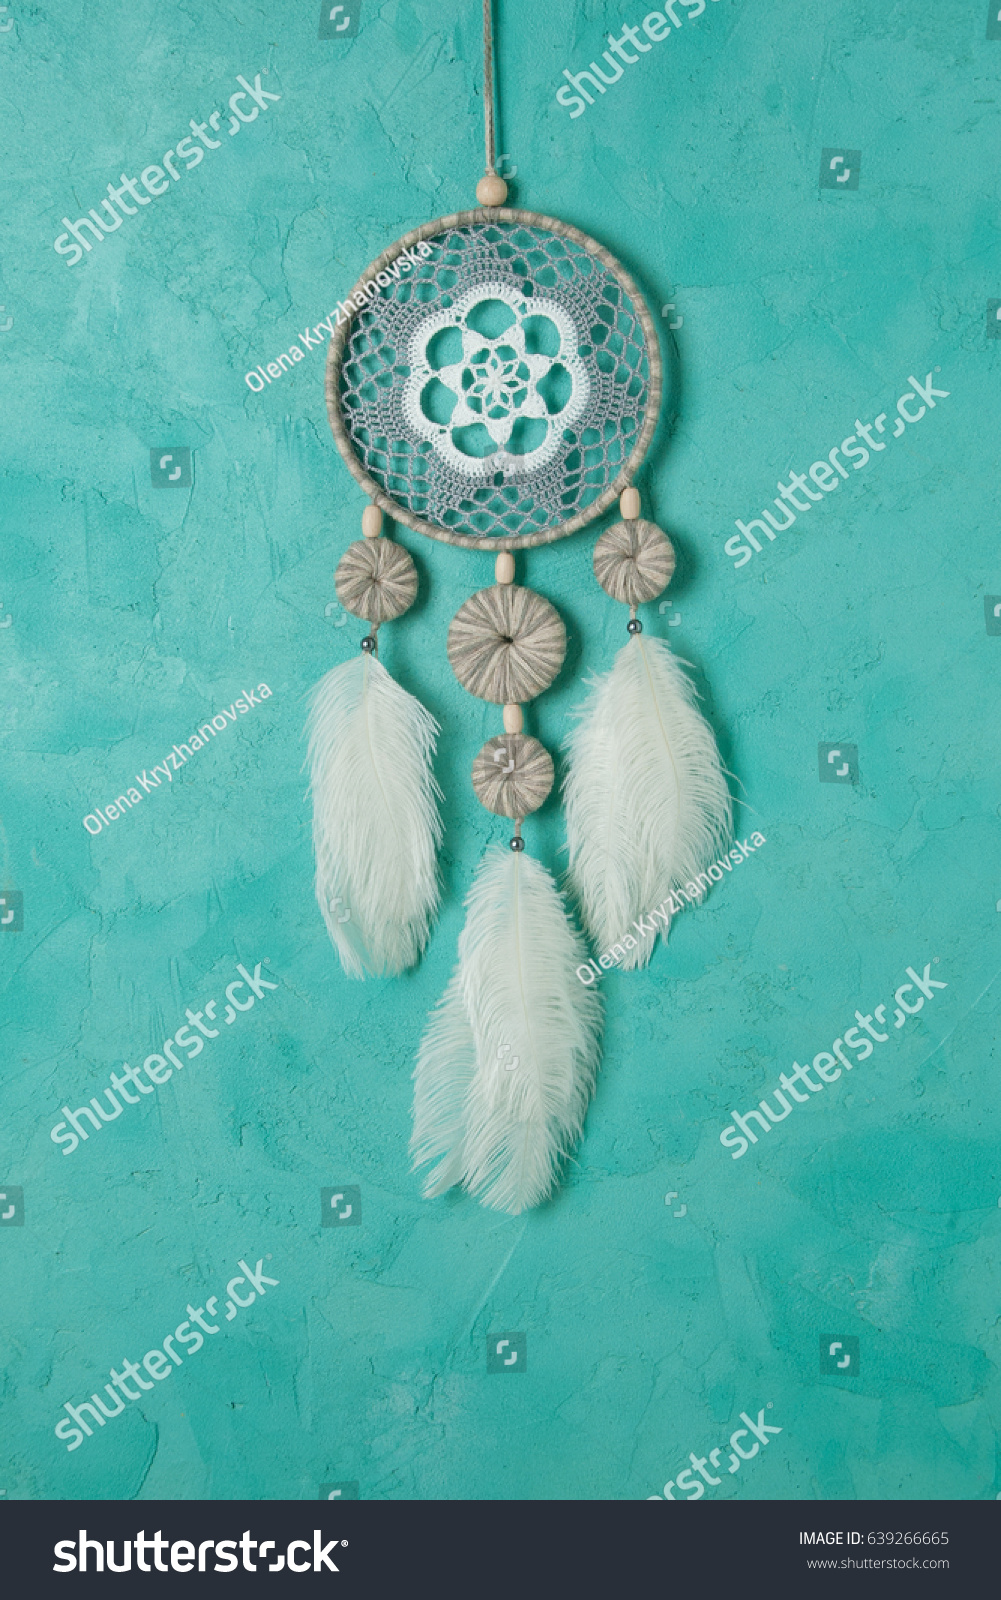 White gray dream catcher close up on aquamarine textured background. Copy space for text #639266665